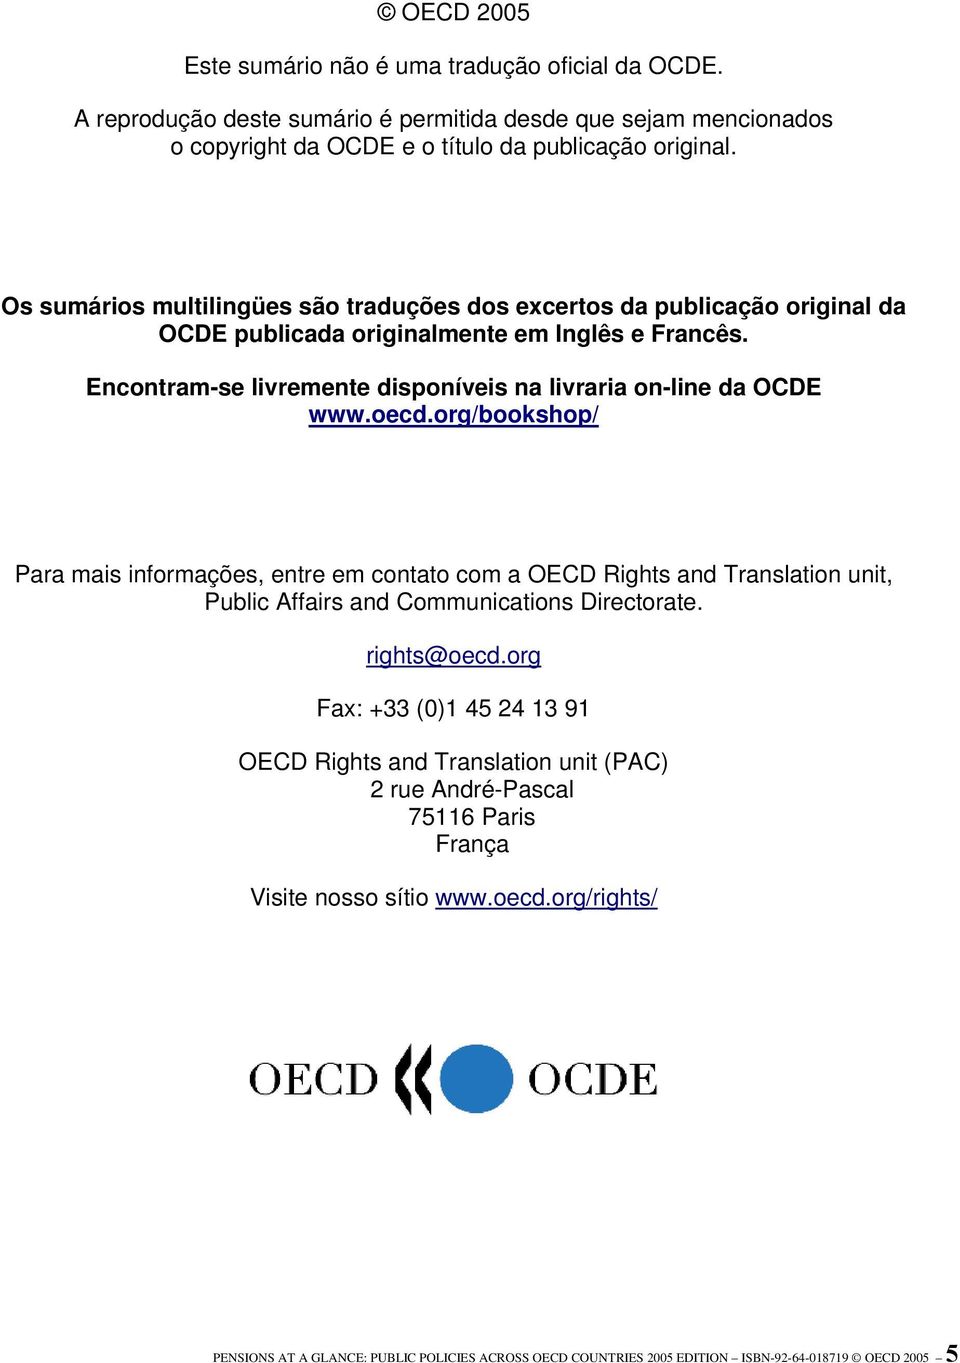 oecd.org/bookshop/ Para mais informações, entre em contato com a OECD Rights and Translation unit, Public Affairs and Communications Directorate. rights@oecd.